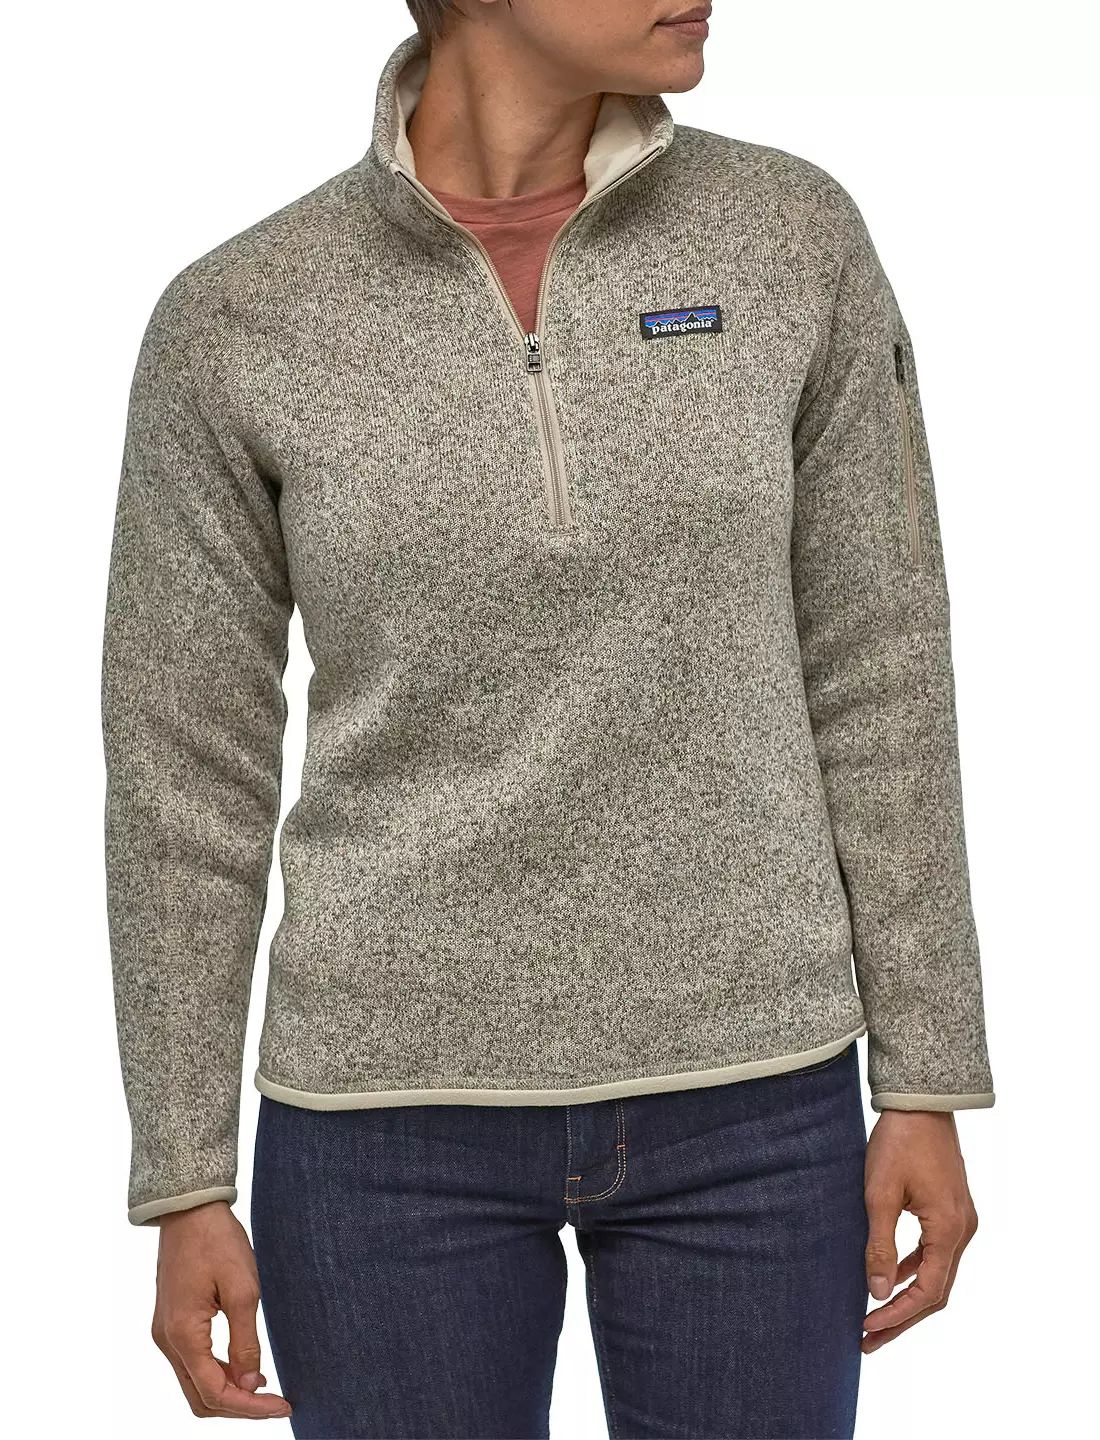 Patagonia Women's Better Sweater 1/4 Zip Pullover | Dick's Sporting Goods | Dick's Sporting Goods